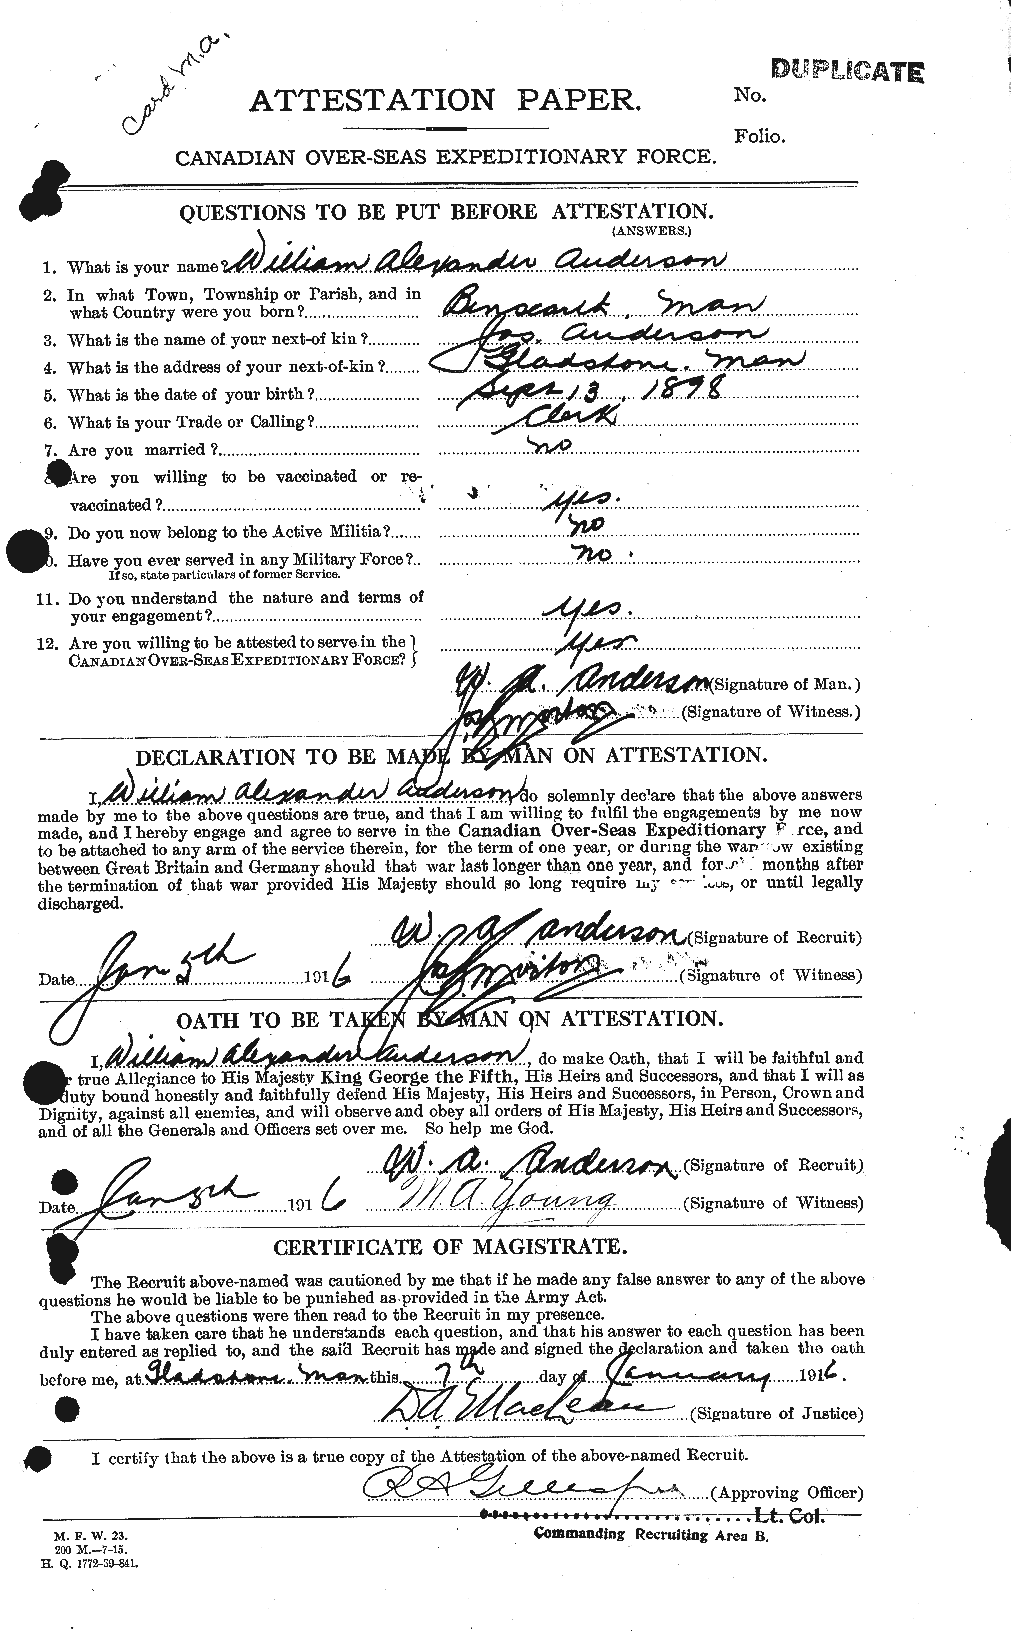 Personnel Records of the First World War - CEF 210748a